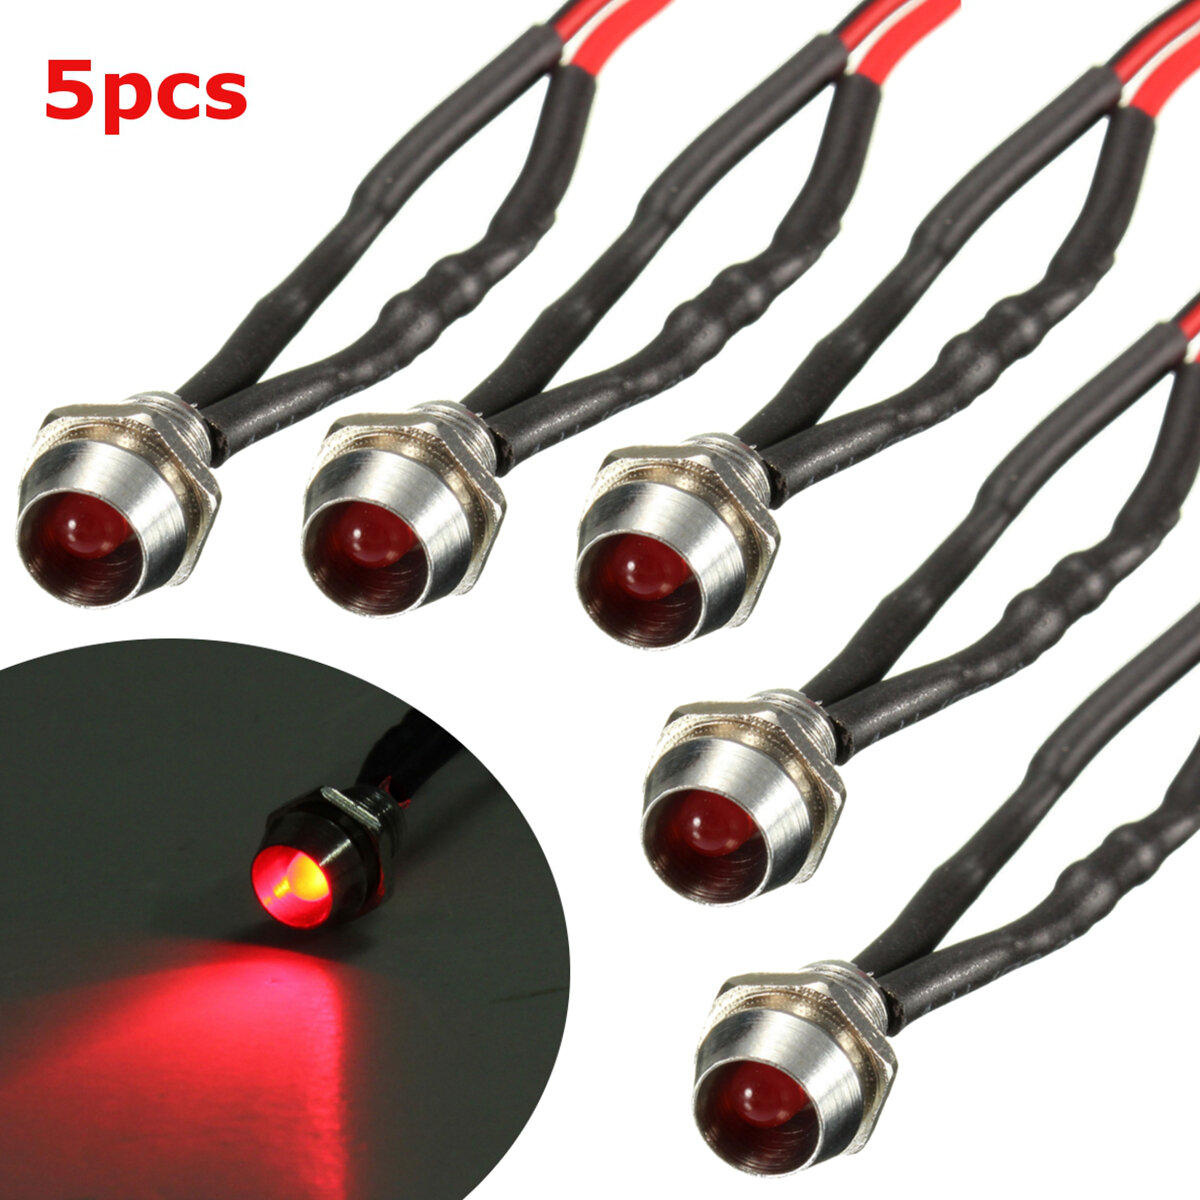 5Pcs 6mm 12V Red LED Metal Indicator Pilot Dash Light Lamp Wire Leads For Car Truck Boat